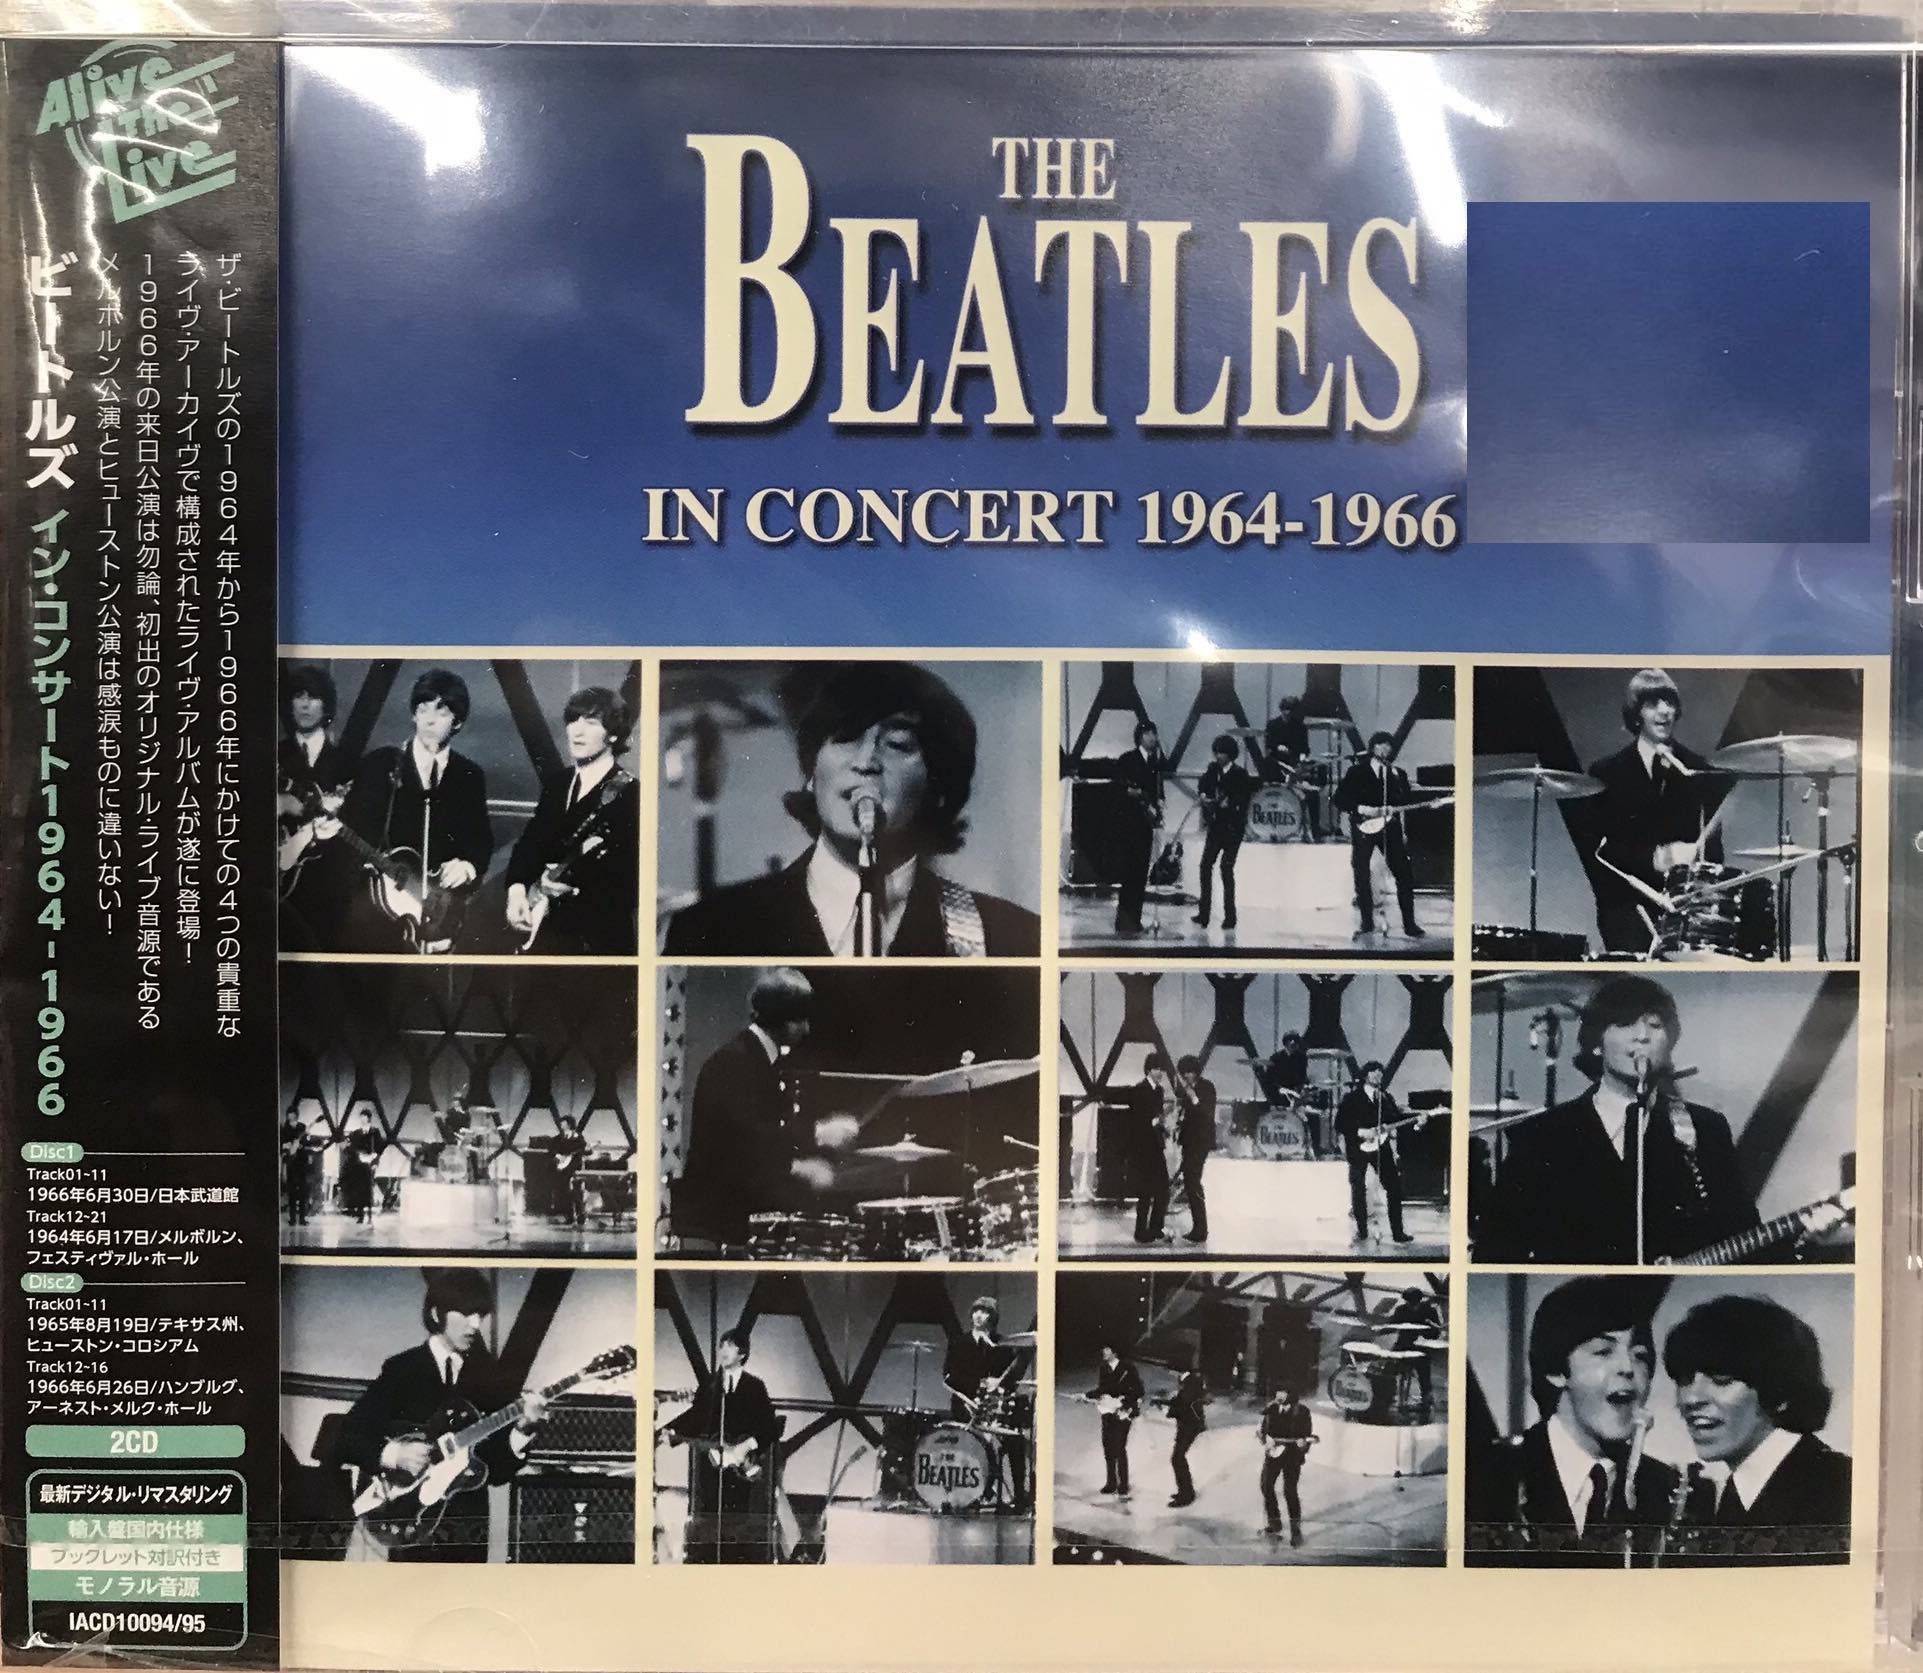 The Beatles -  The Beatles in Concert 1964-1966